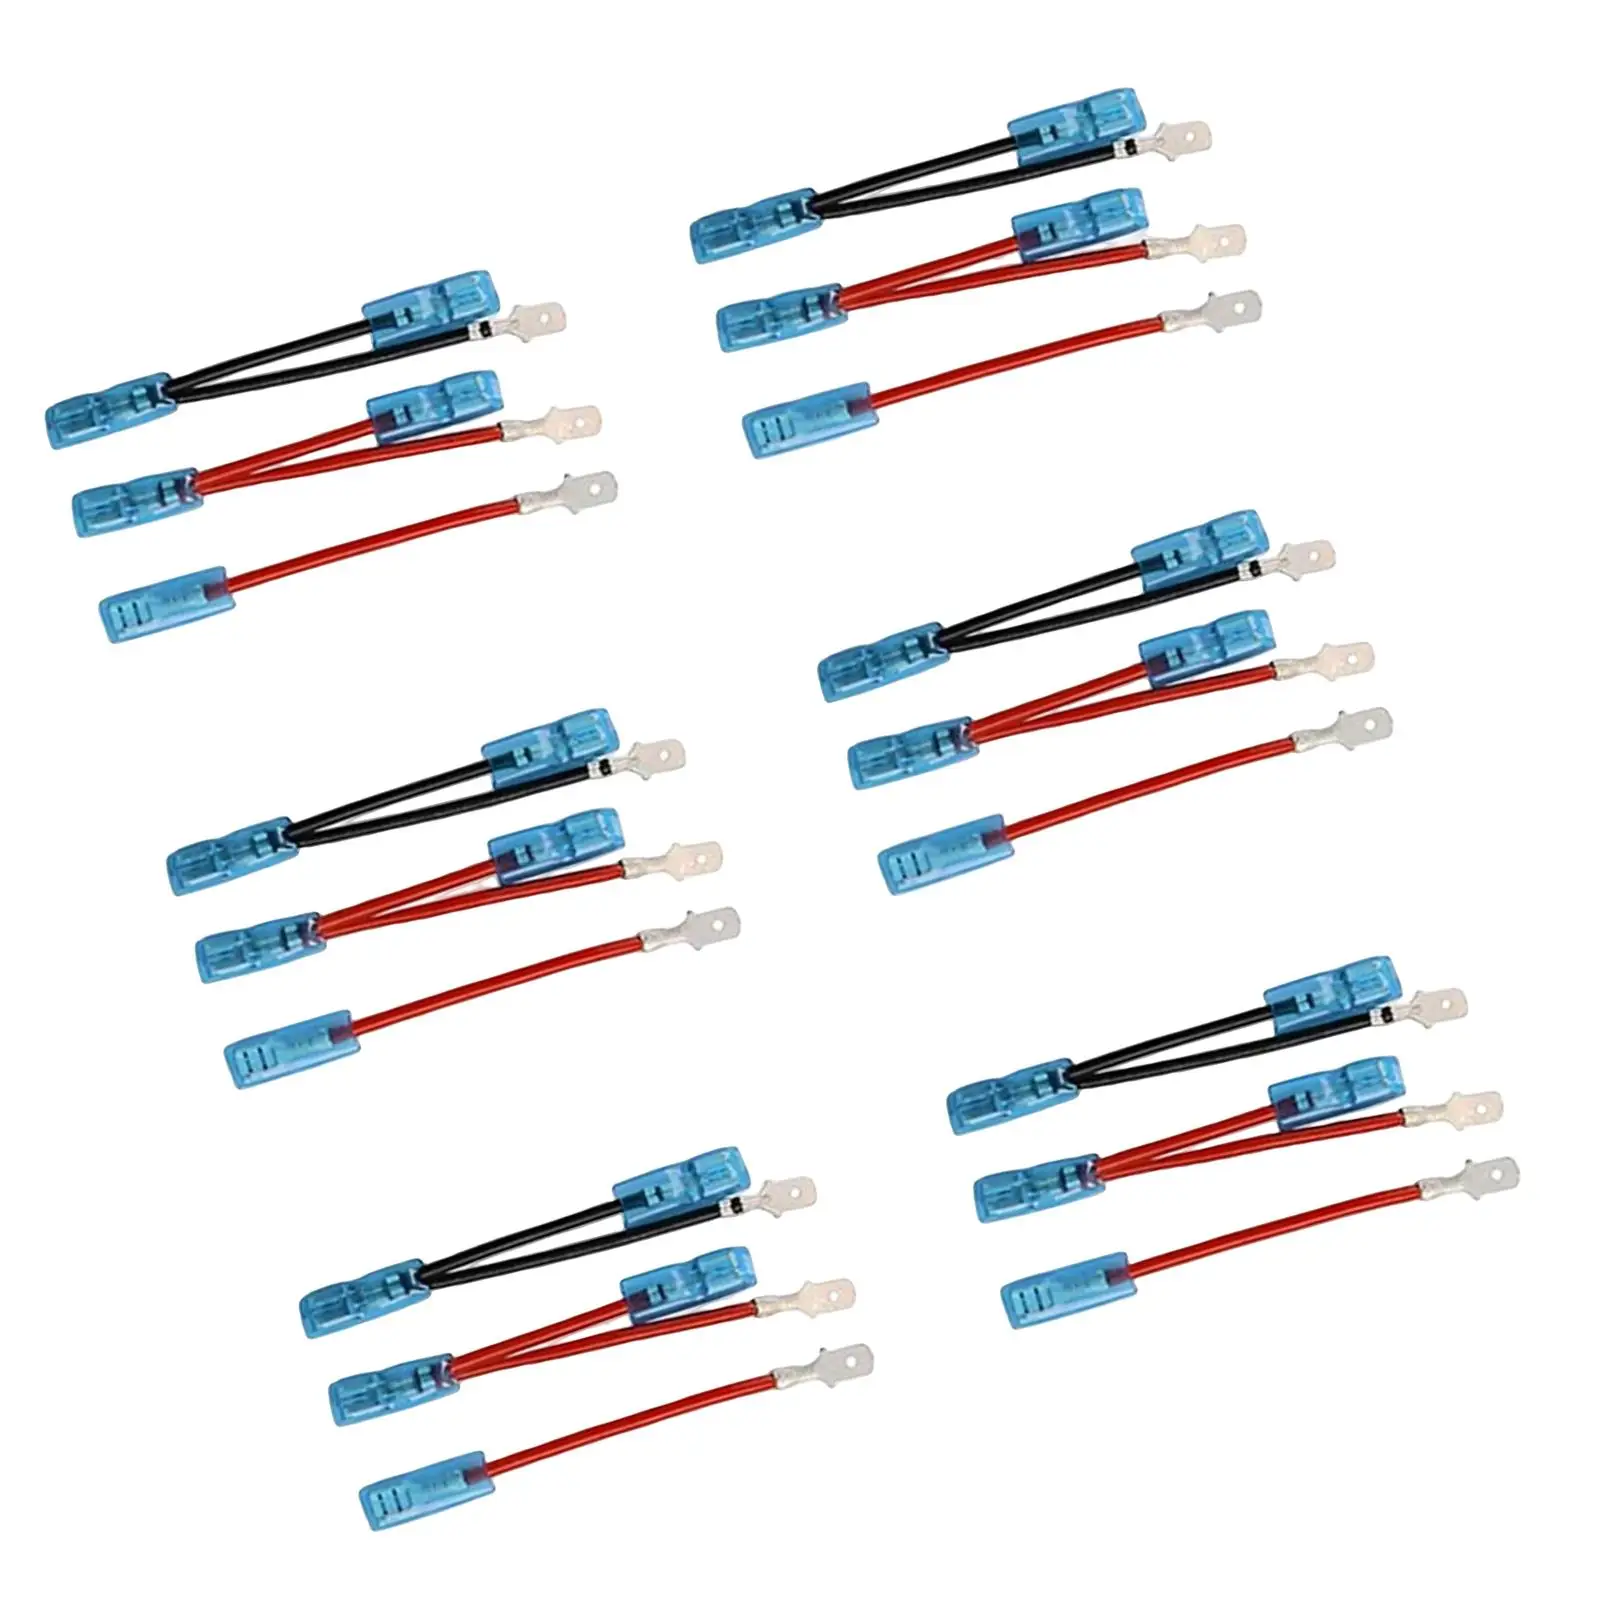 6Pcs 5 Pin Rocker Switch Jumper Wires Set Replacement Accessory for UTV